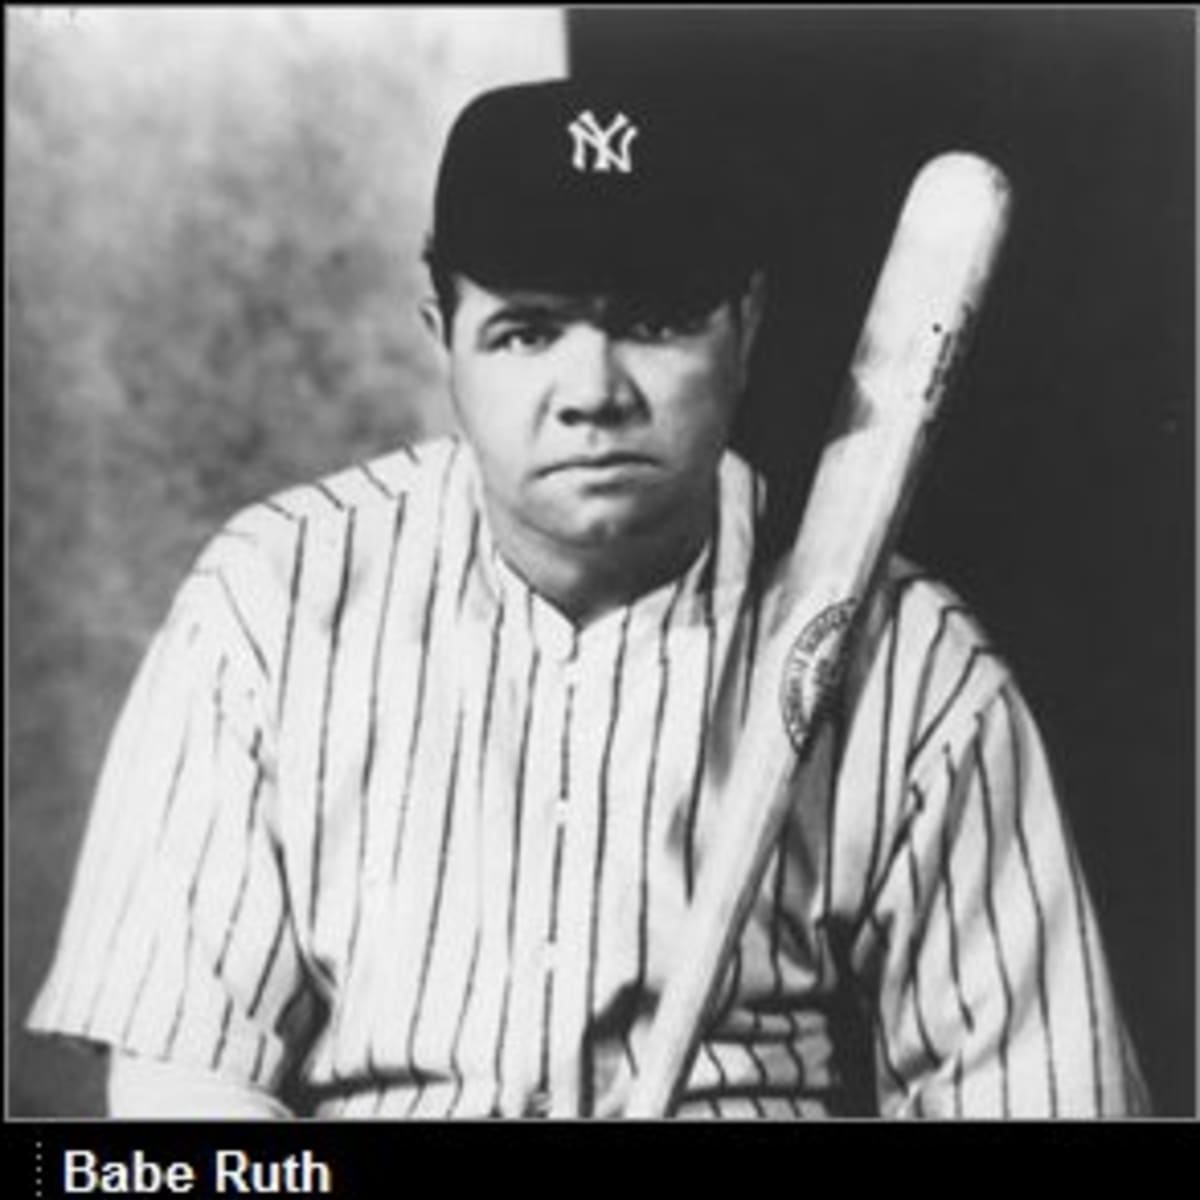 What was Babe Ruth's real first name?